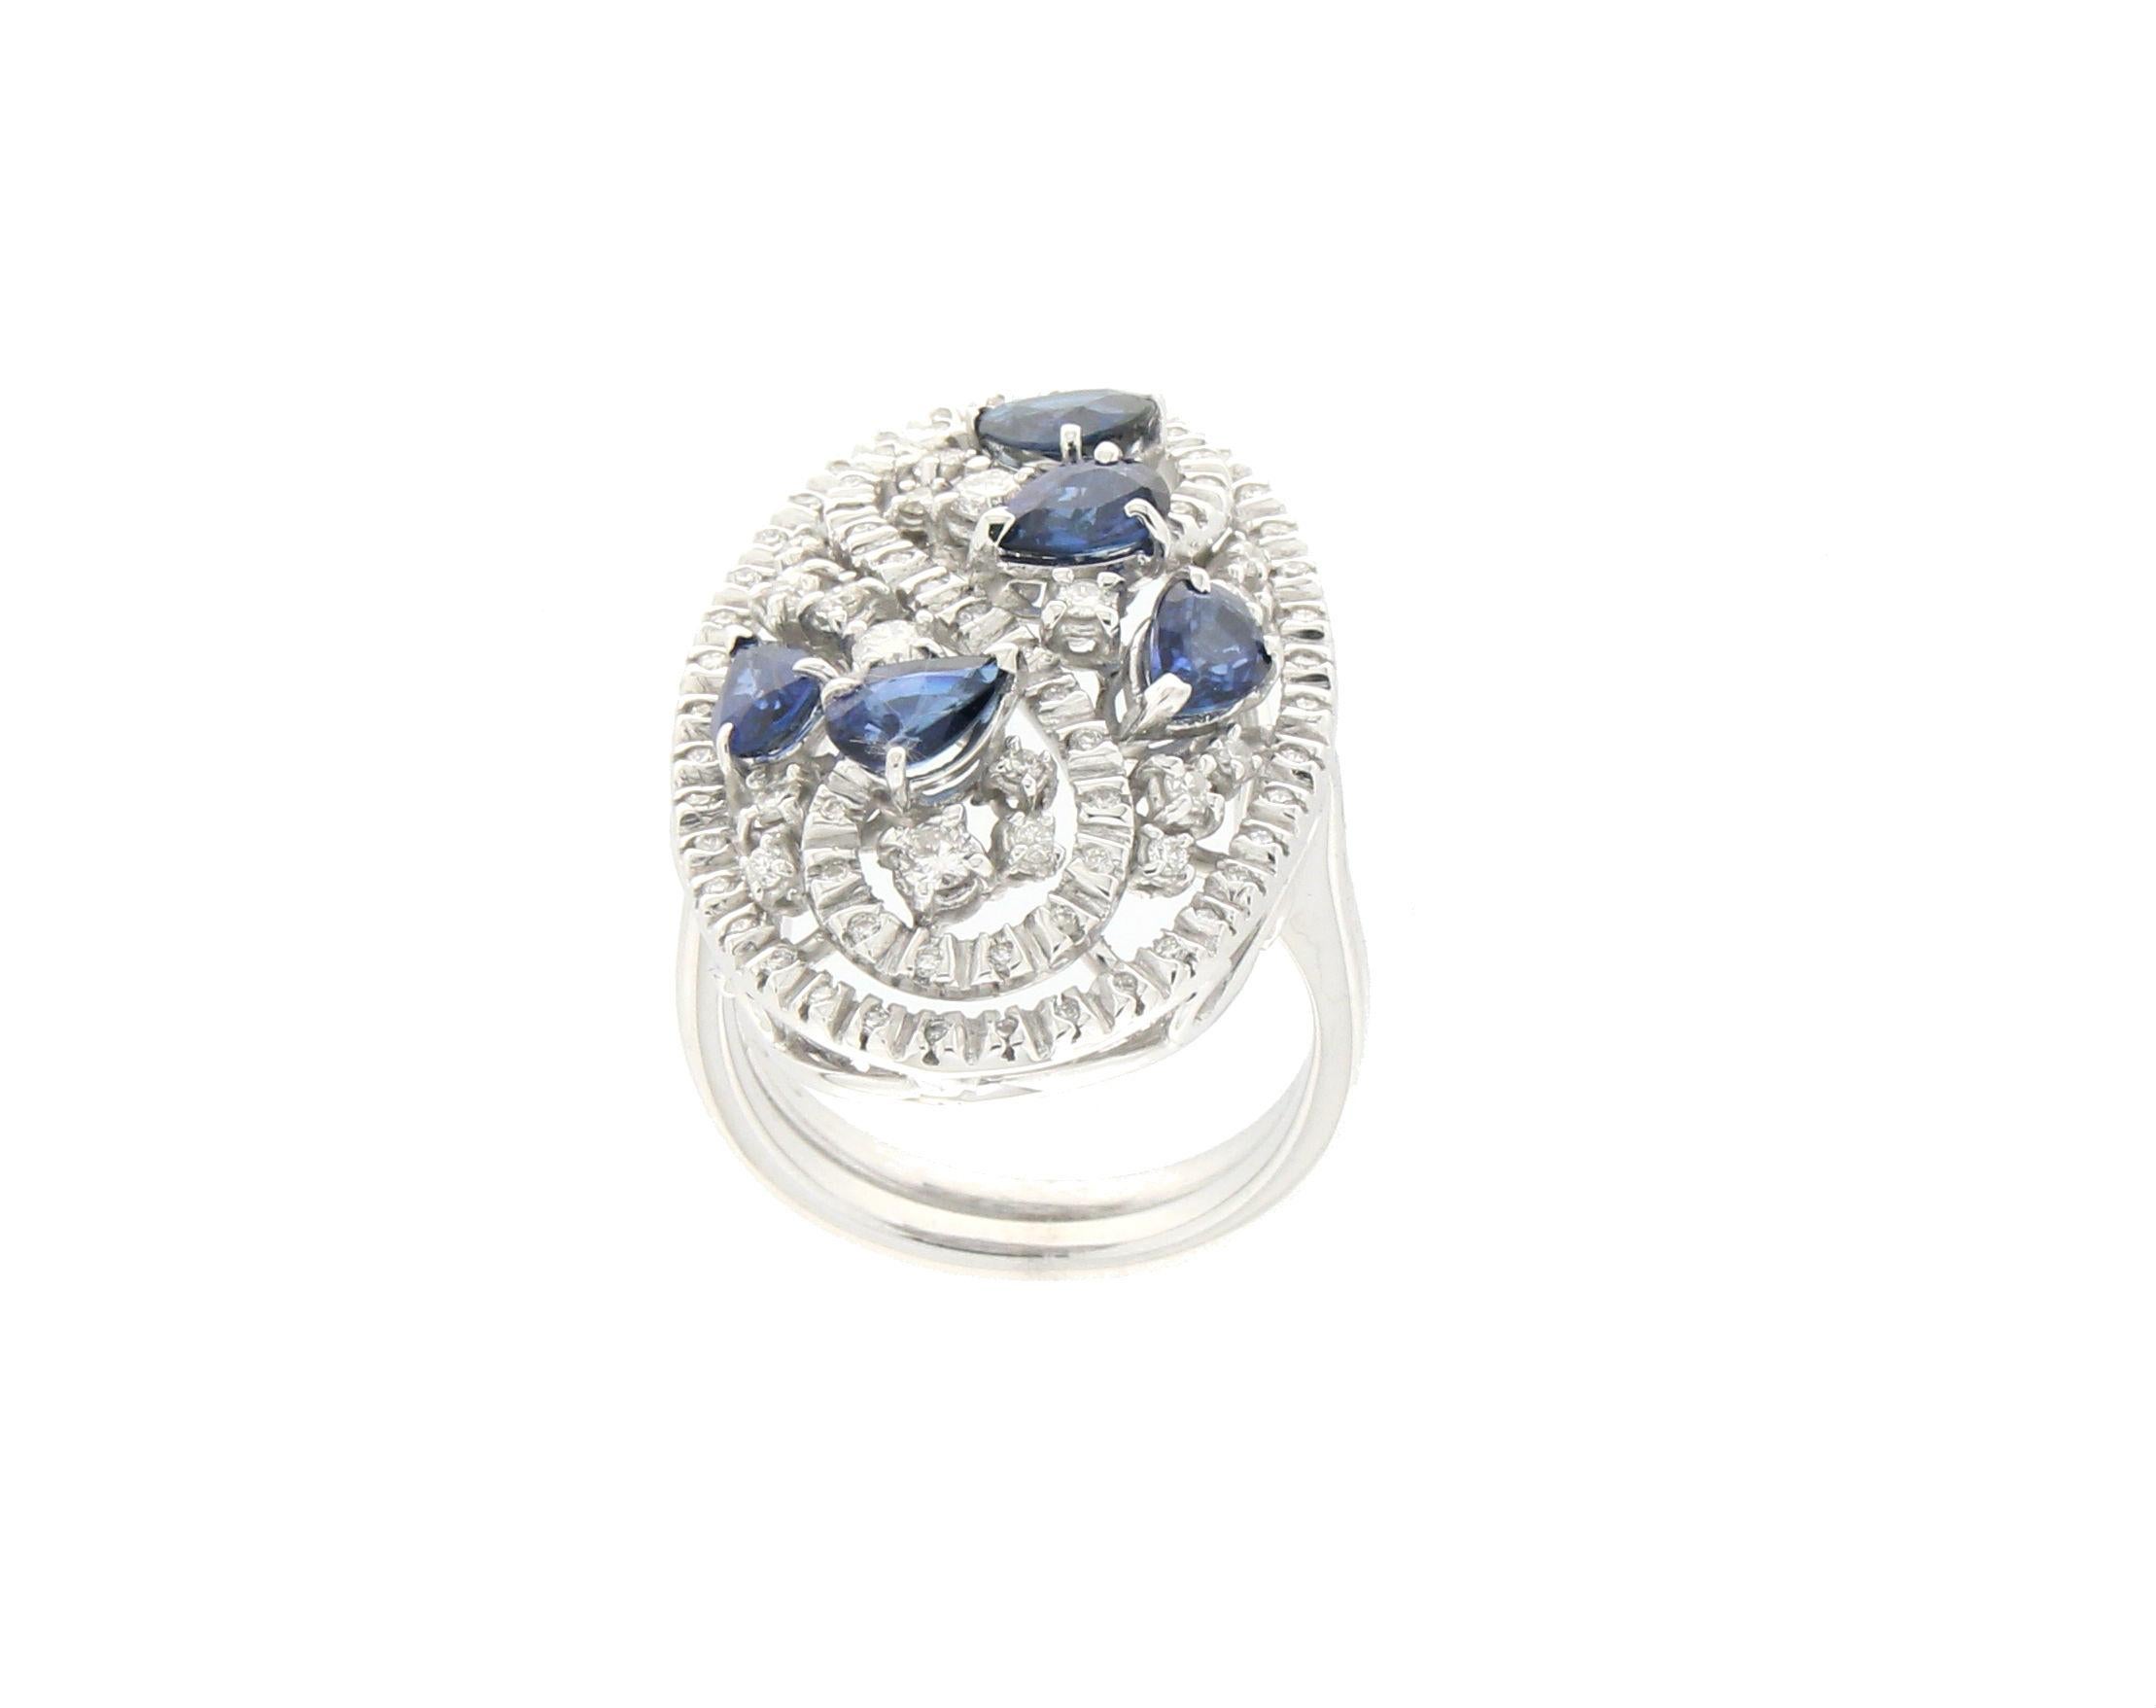 18 karat white gold cocktail ring. Handmade by our artisans assembled with diamonds and sapphires

Diamonds weight 0.73 karat
Sapphires weight 2.40 karat
Ring total weight 14.20 grams
Ring size 8 US 16.80 Ita

(all rings are can be resized)